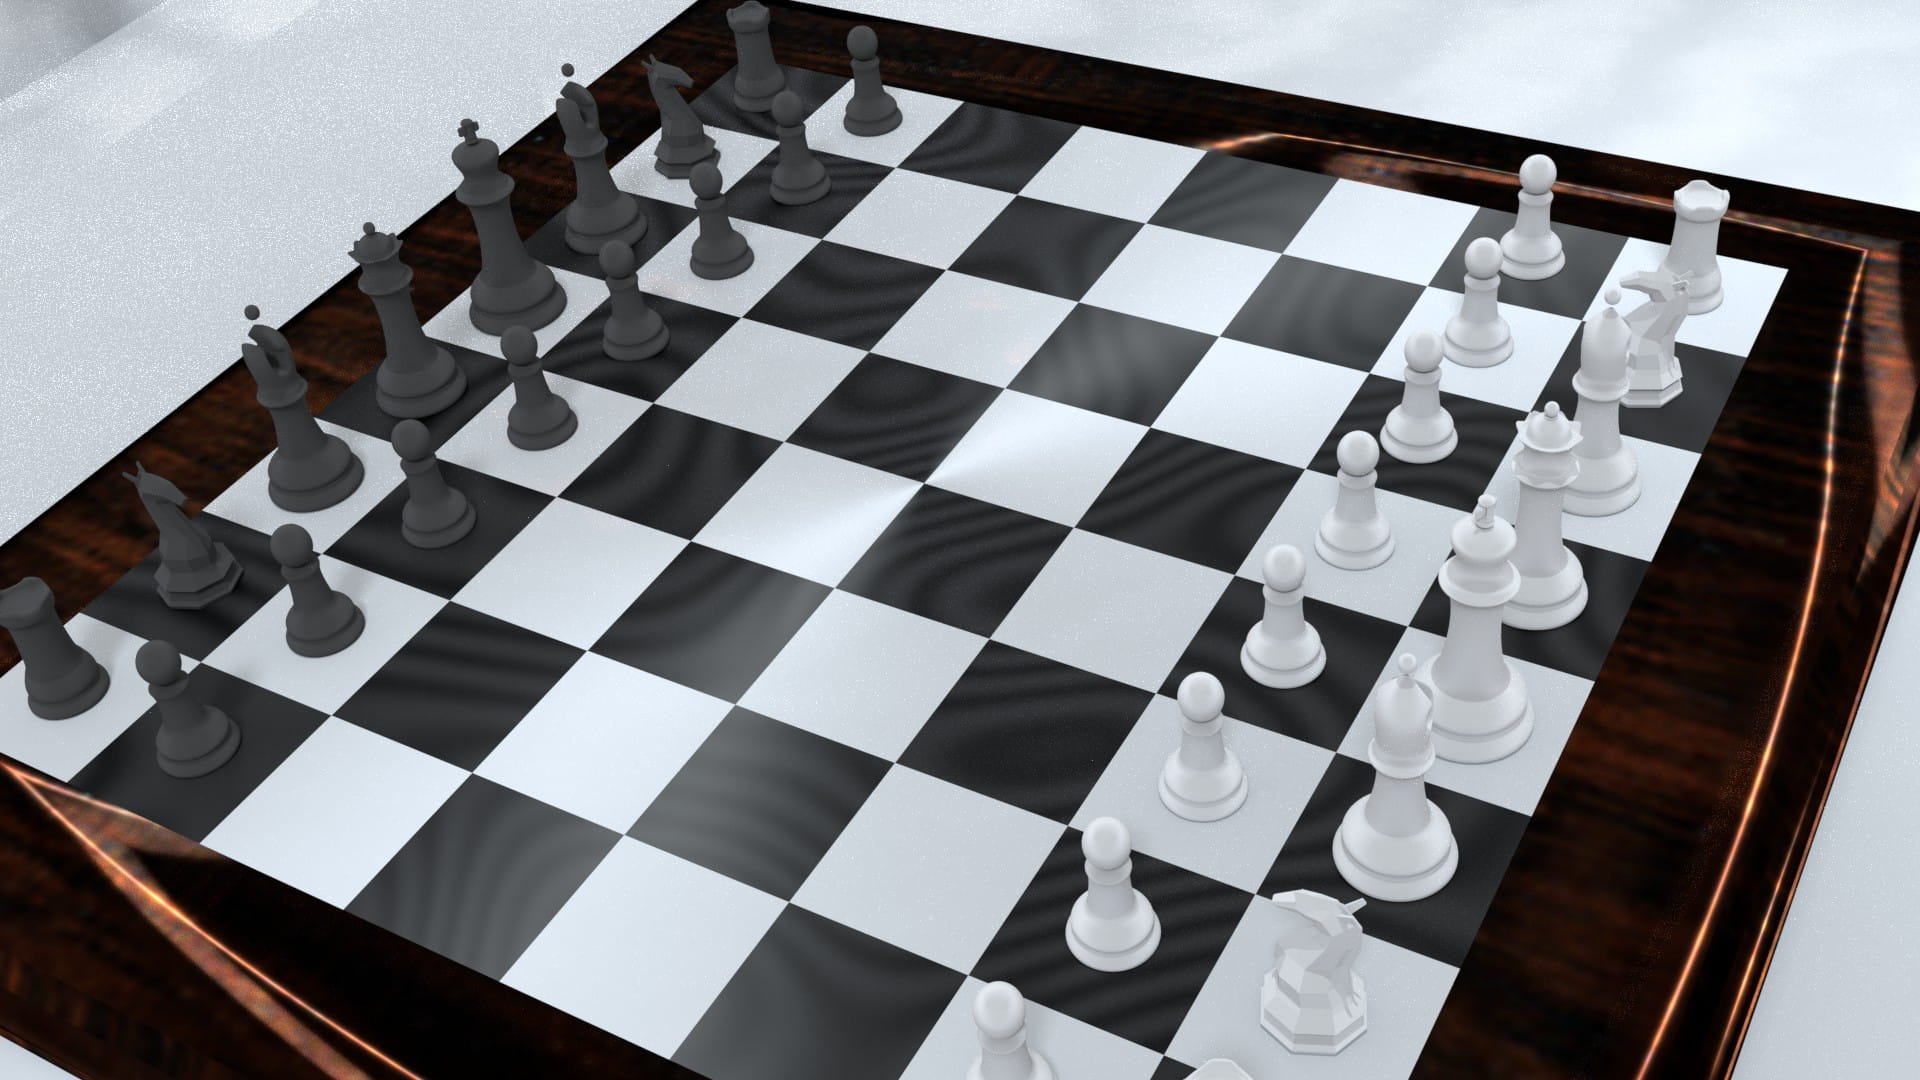 A Frosted Glass Chessboard